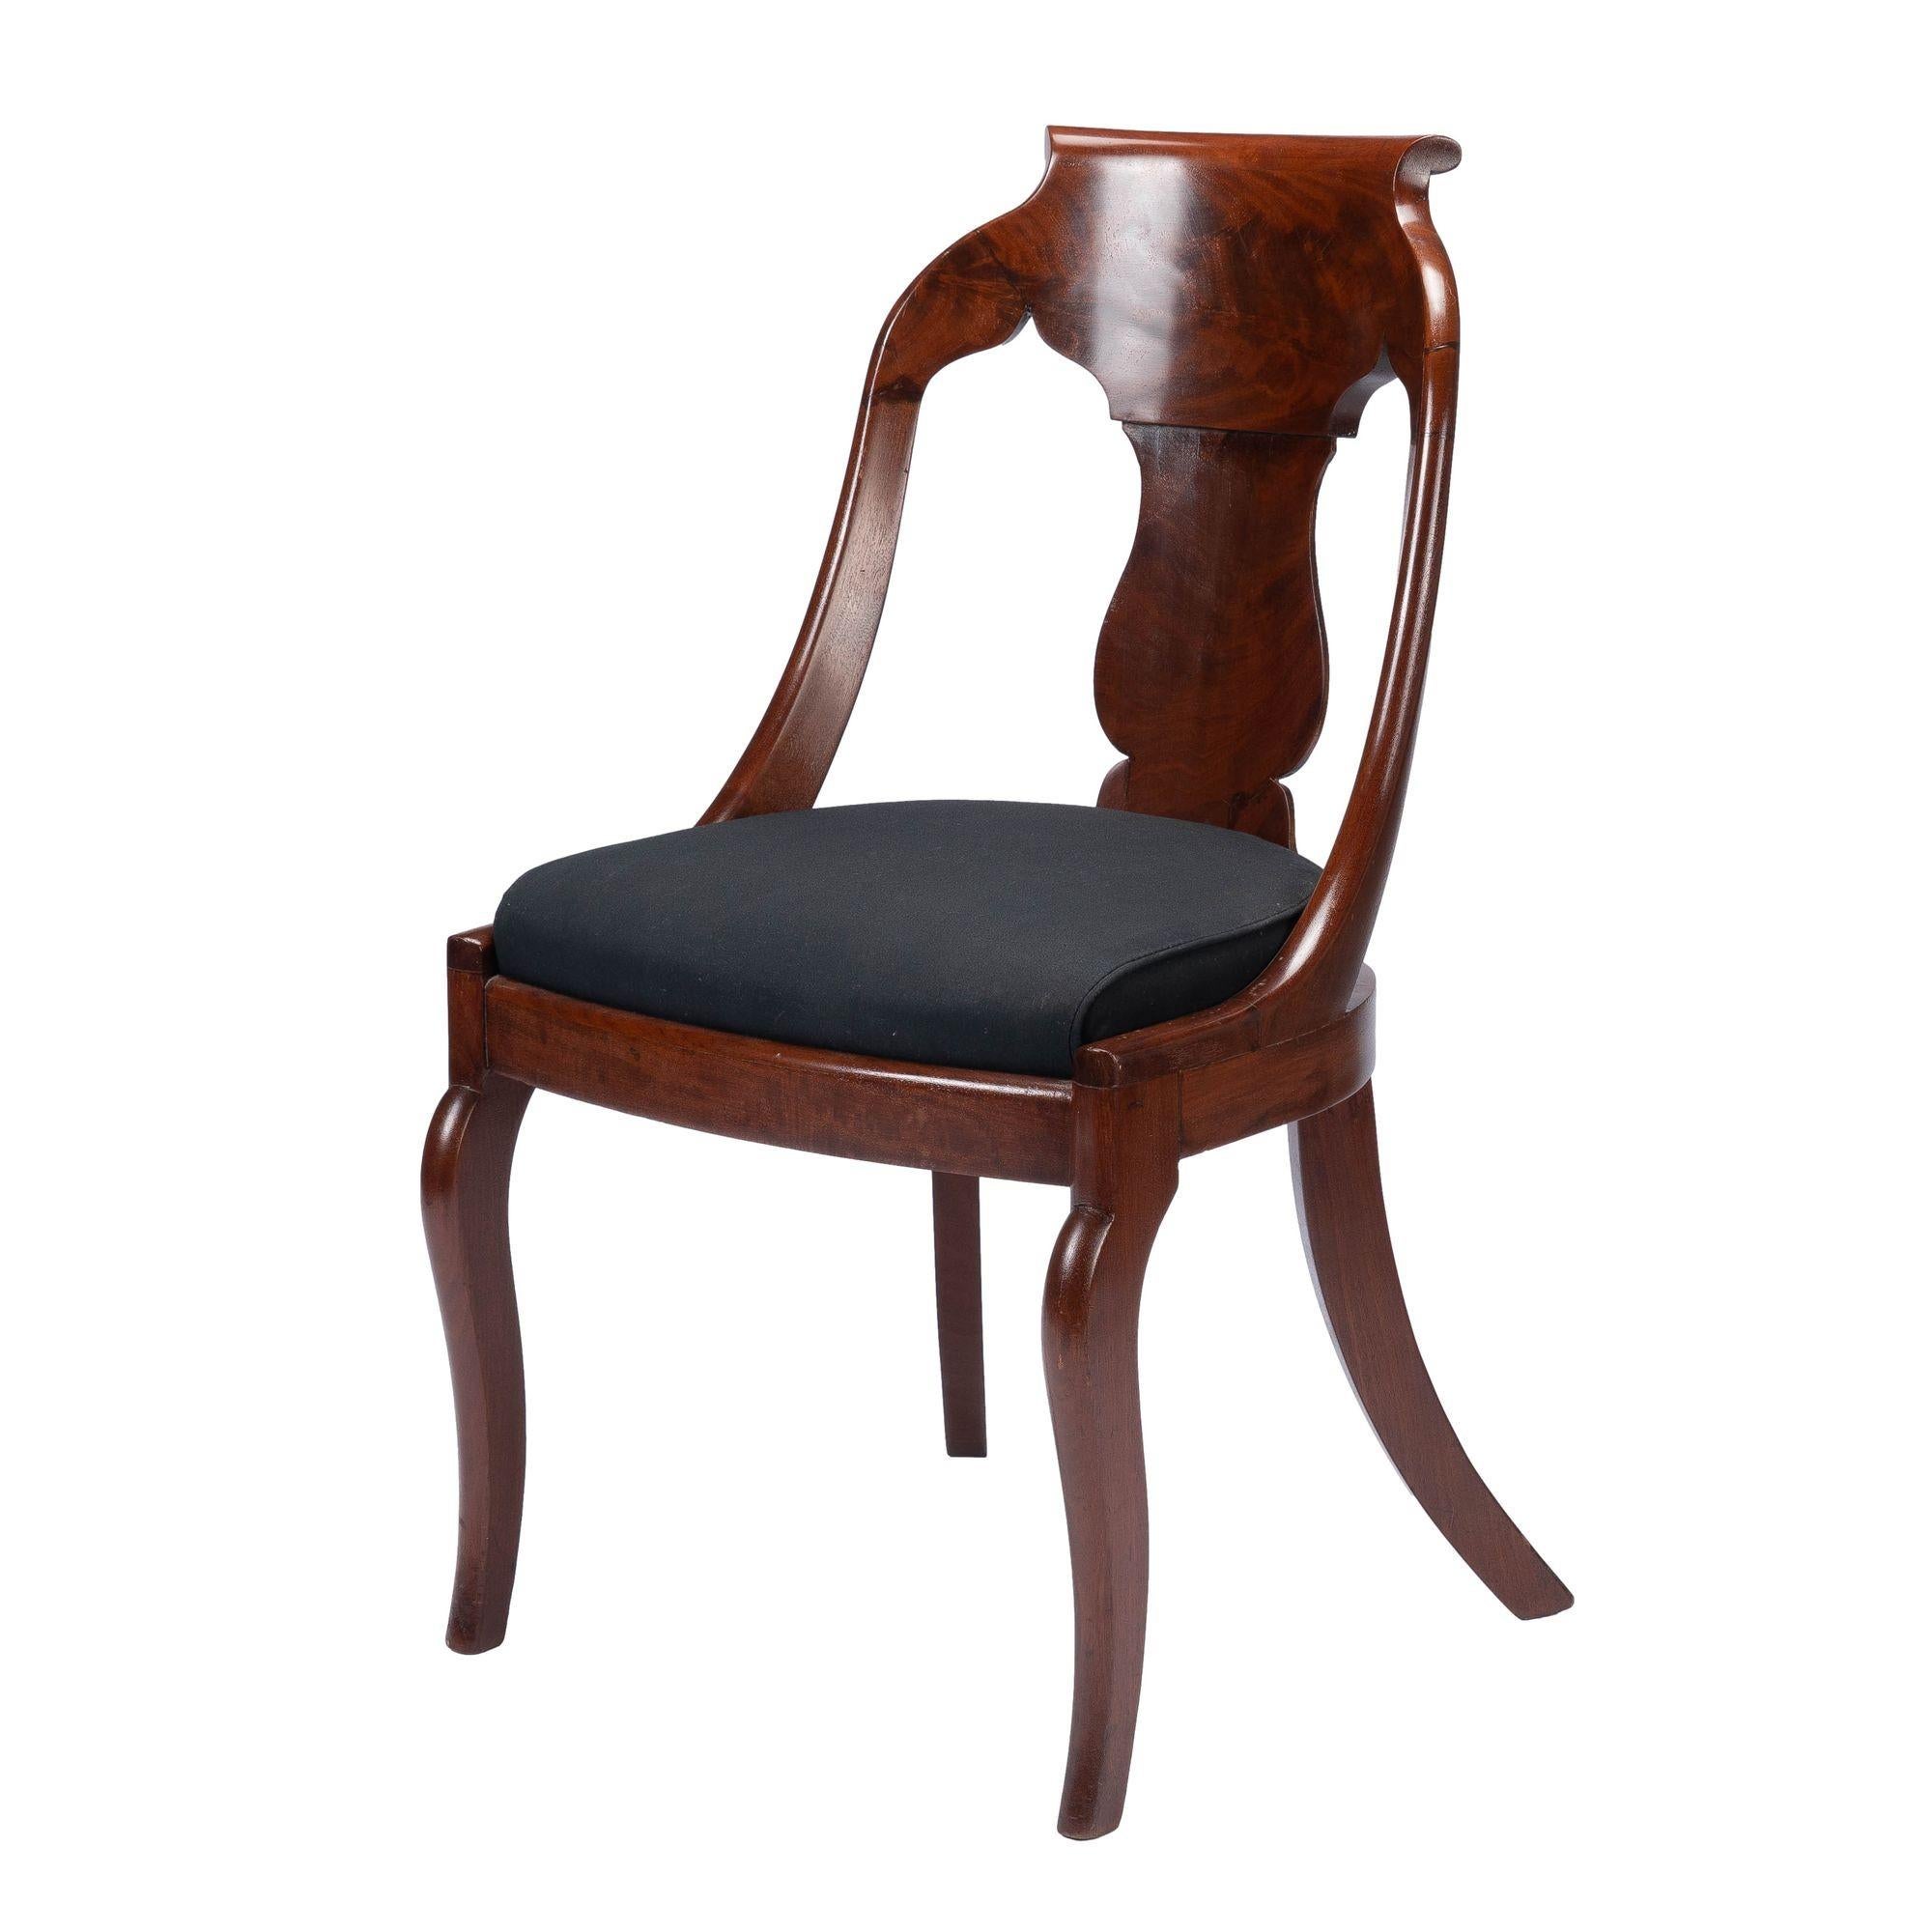 Upholstery Pair of American Mahogany Upholstered Slip Seat Gondola Chairs, '1830-1935' For Sale